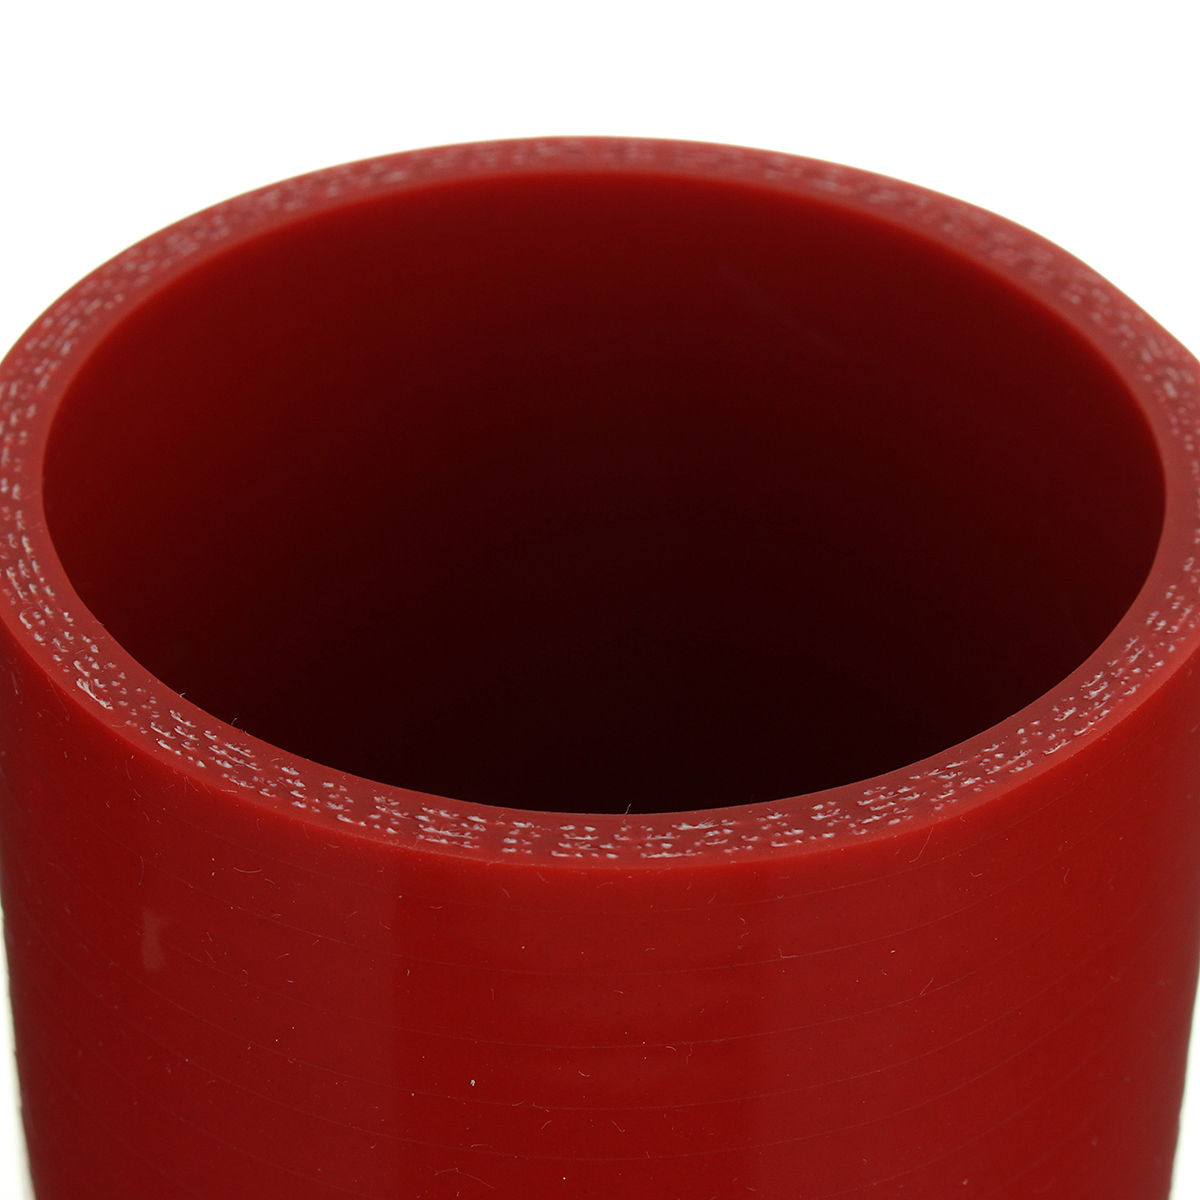 100mm-Straight-Silicone-Hose-Coupling-Connector-Silicon-Rubber-Tube-Joiner-Pipe-Ash-1619119-8